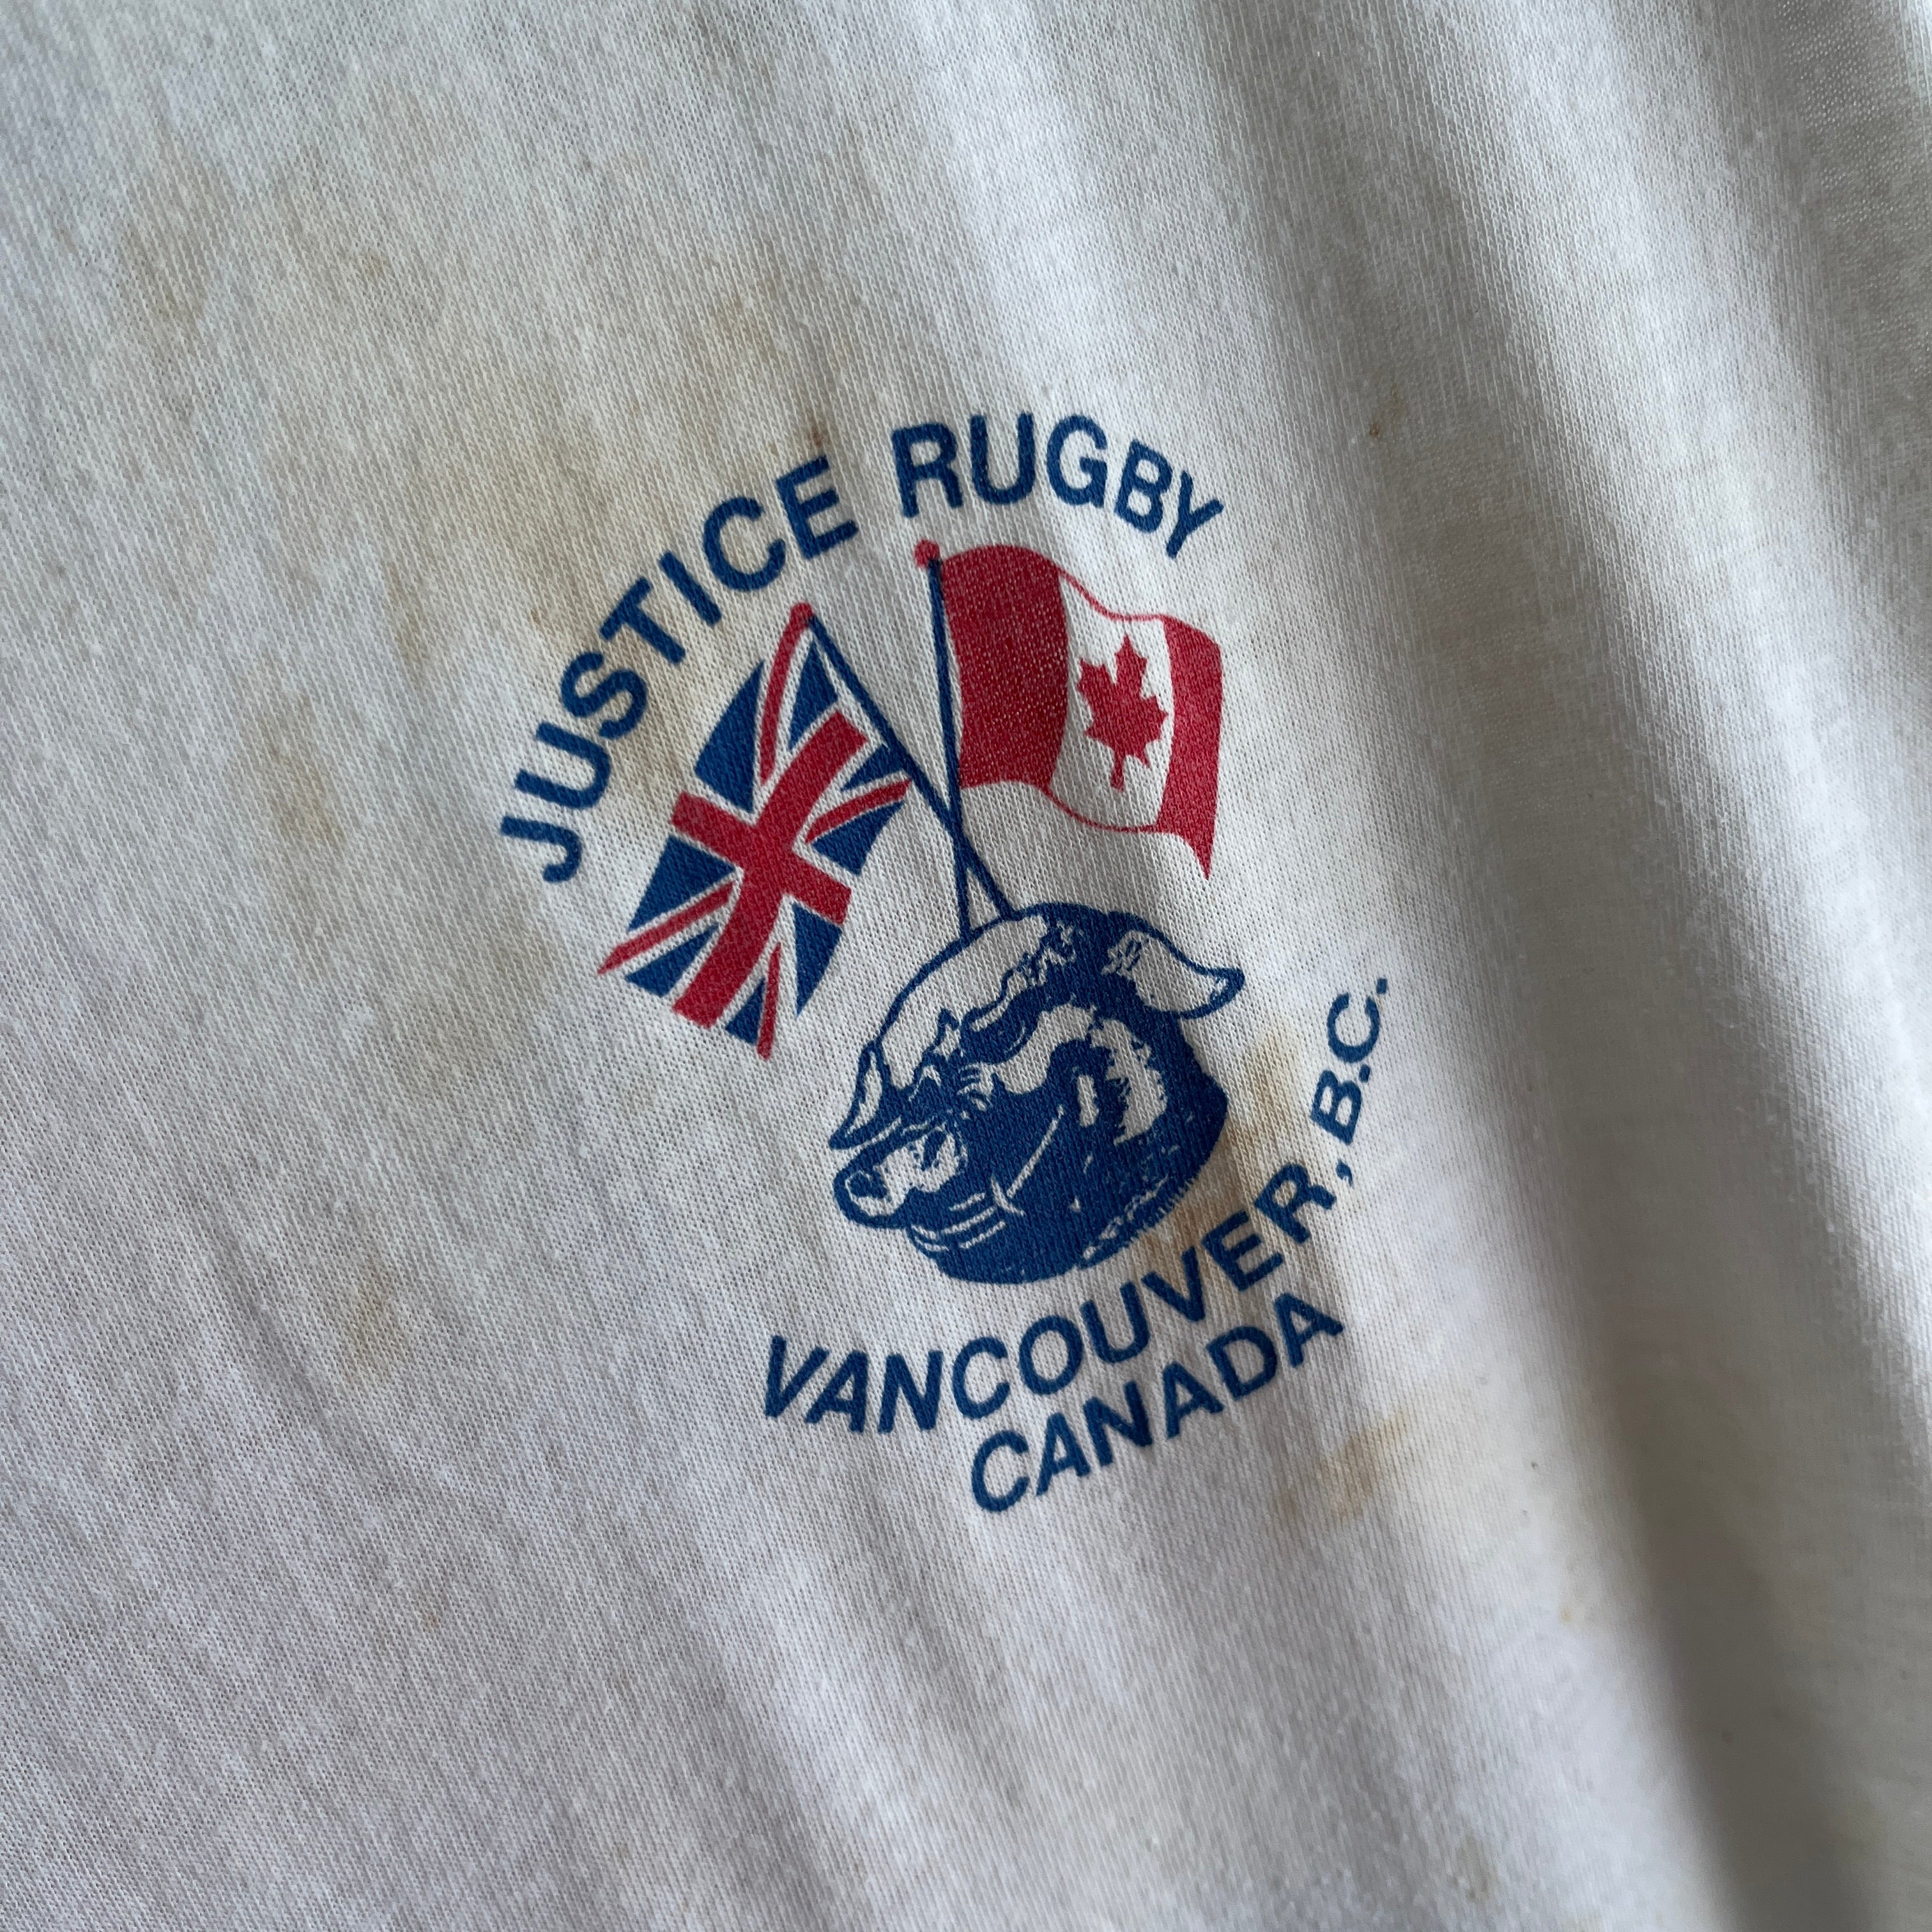 1987 Justice Rugby British Tour (The Backside) Vancouver, B.C. Canada - Super Stained